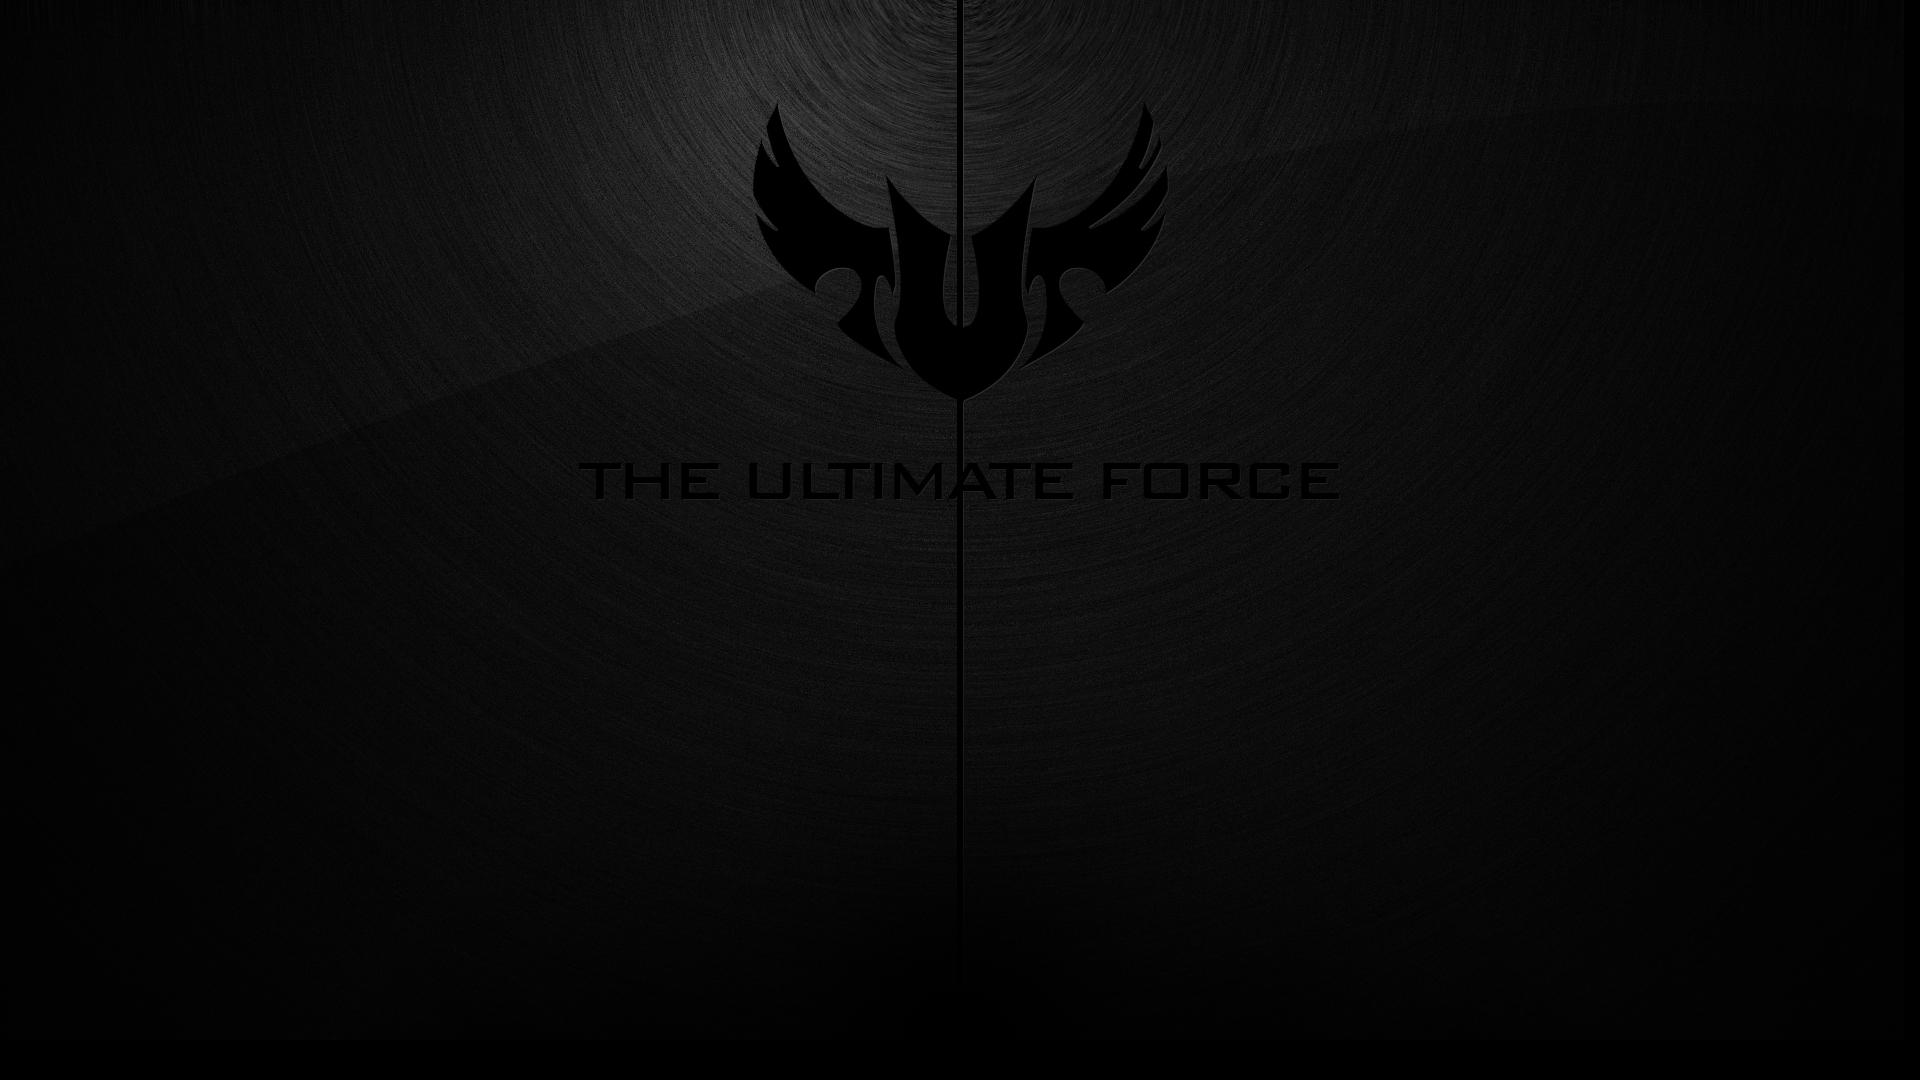 Wallpaper  Downloads  THE ULTIMATE FORCE